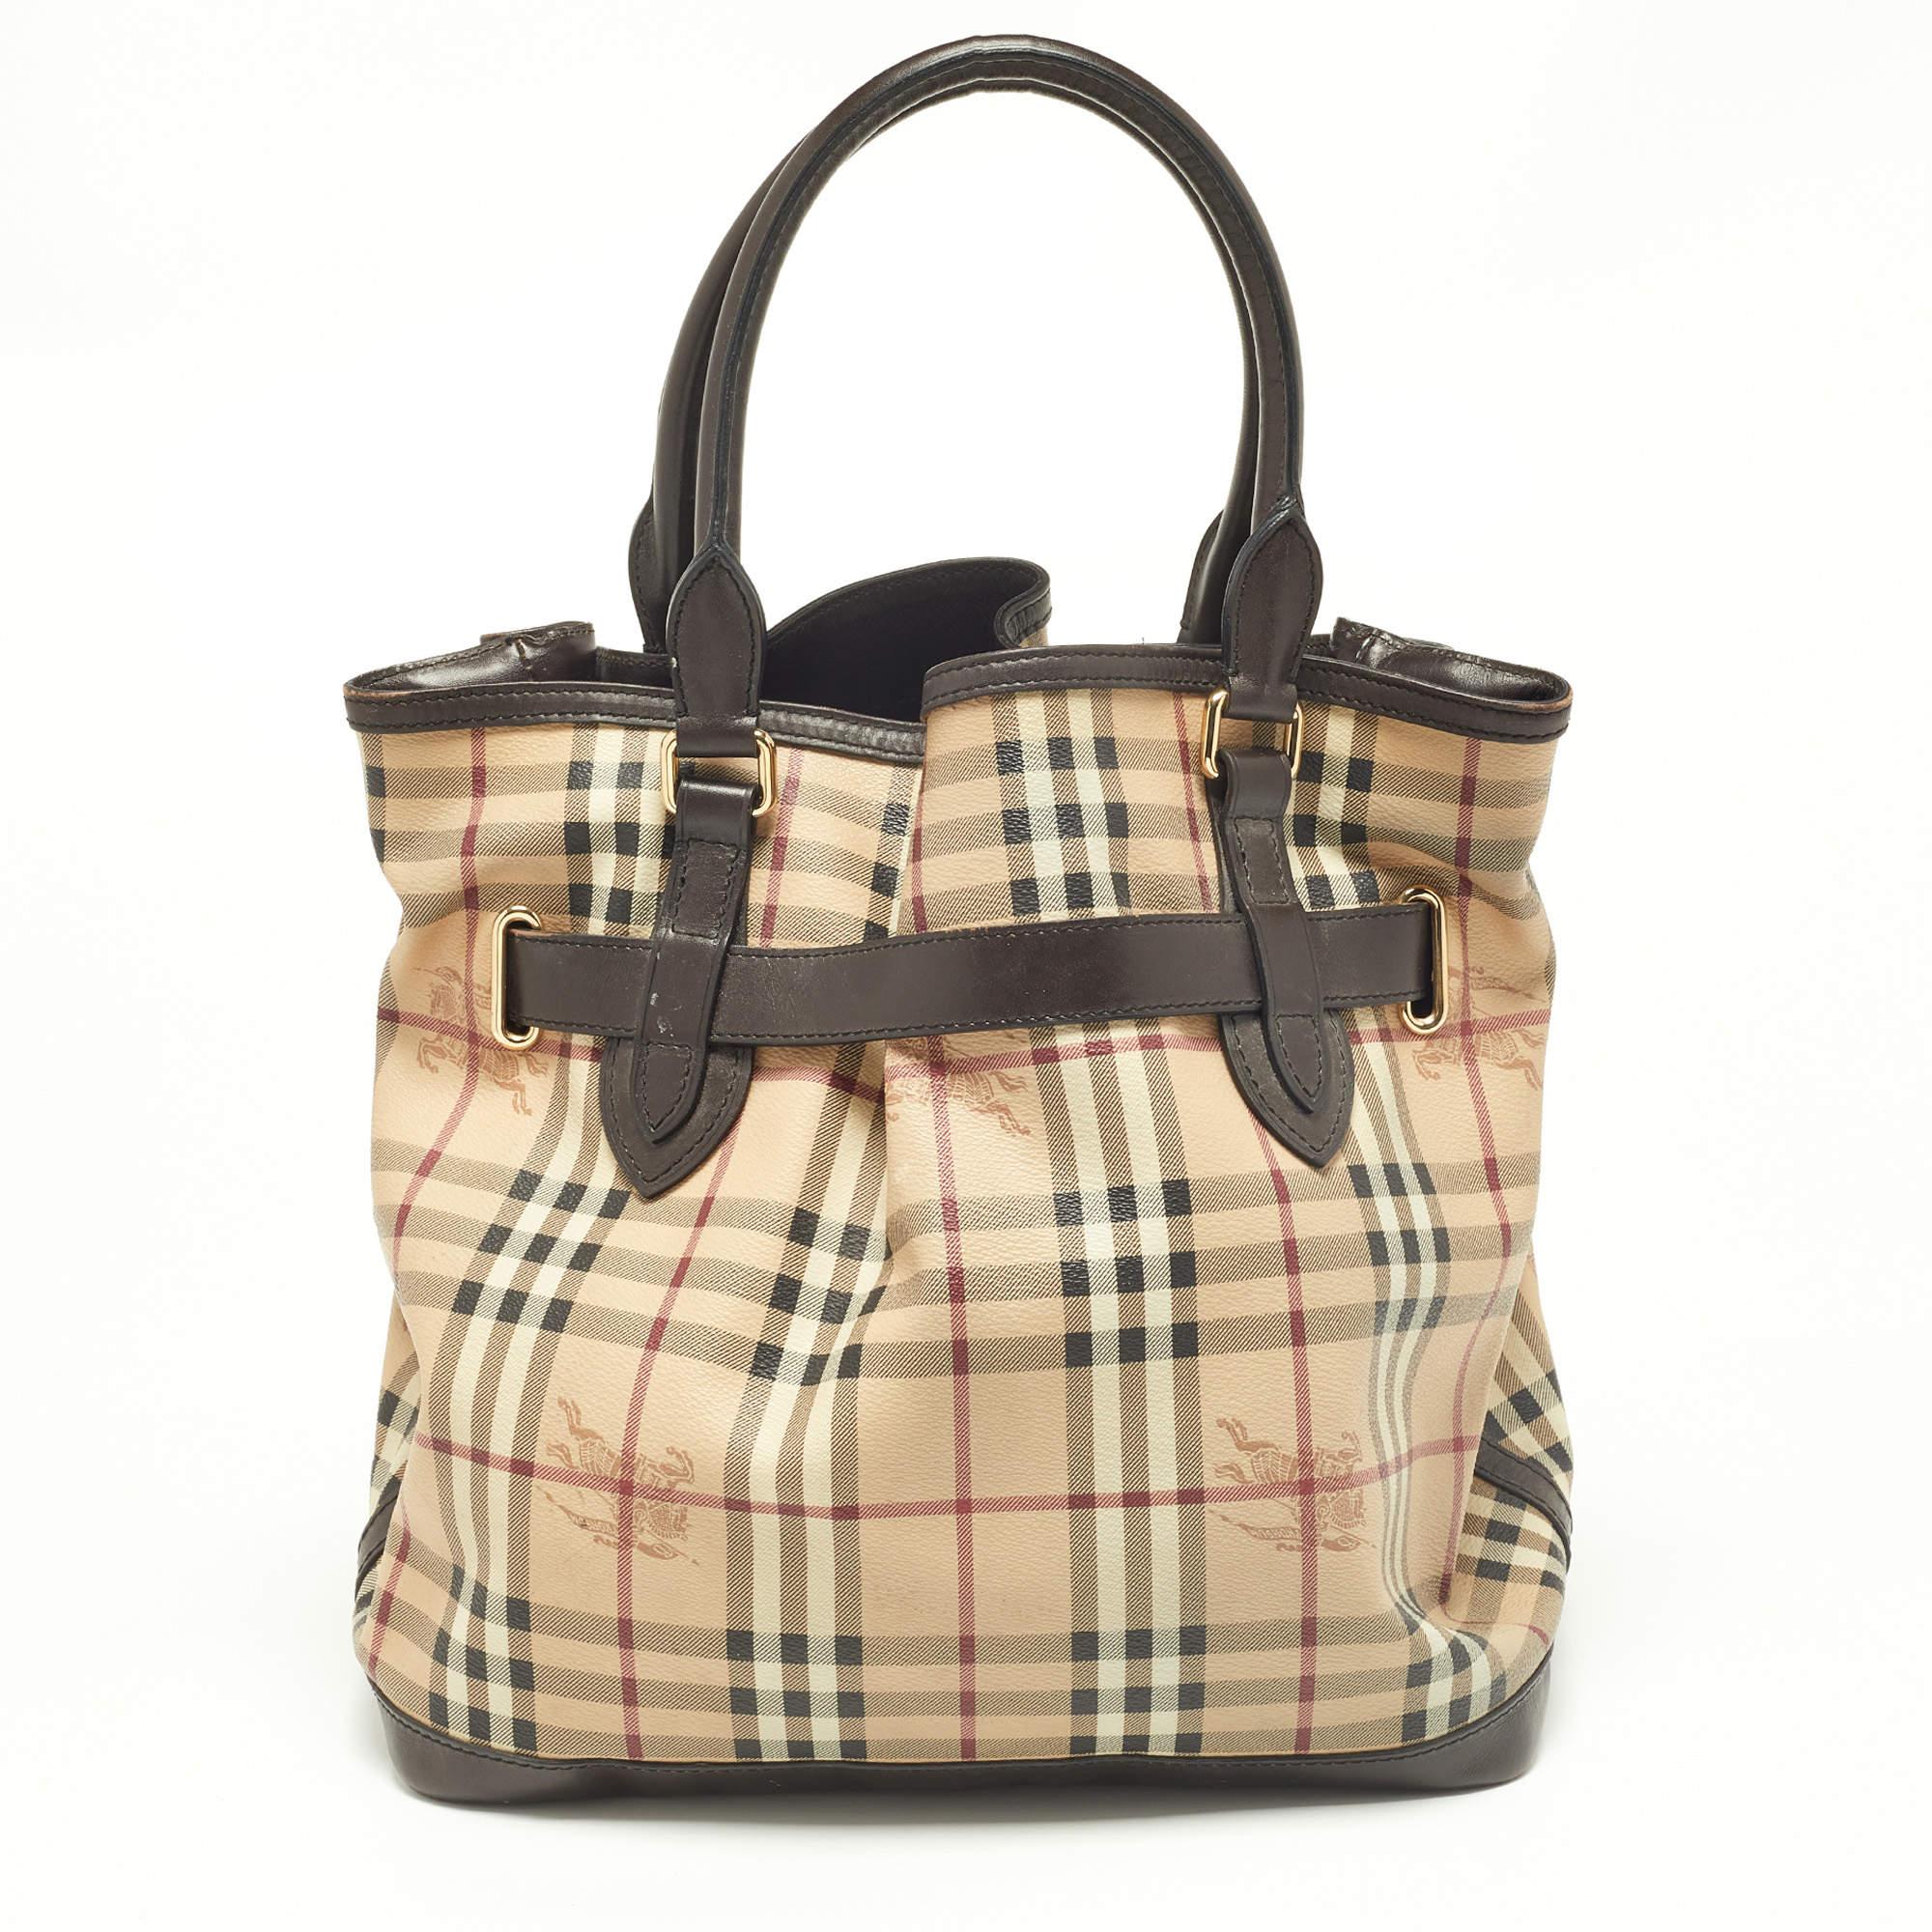 Carry everything you need in style thanks to this Burberry Haymarket Check tote. Crafted from the best materials, this is an accessory that promises enduring style and usage.

